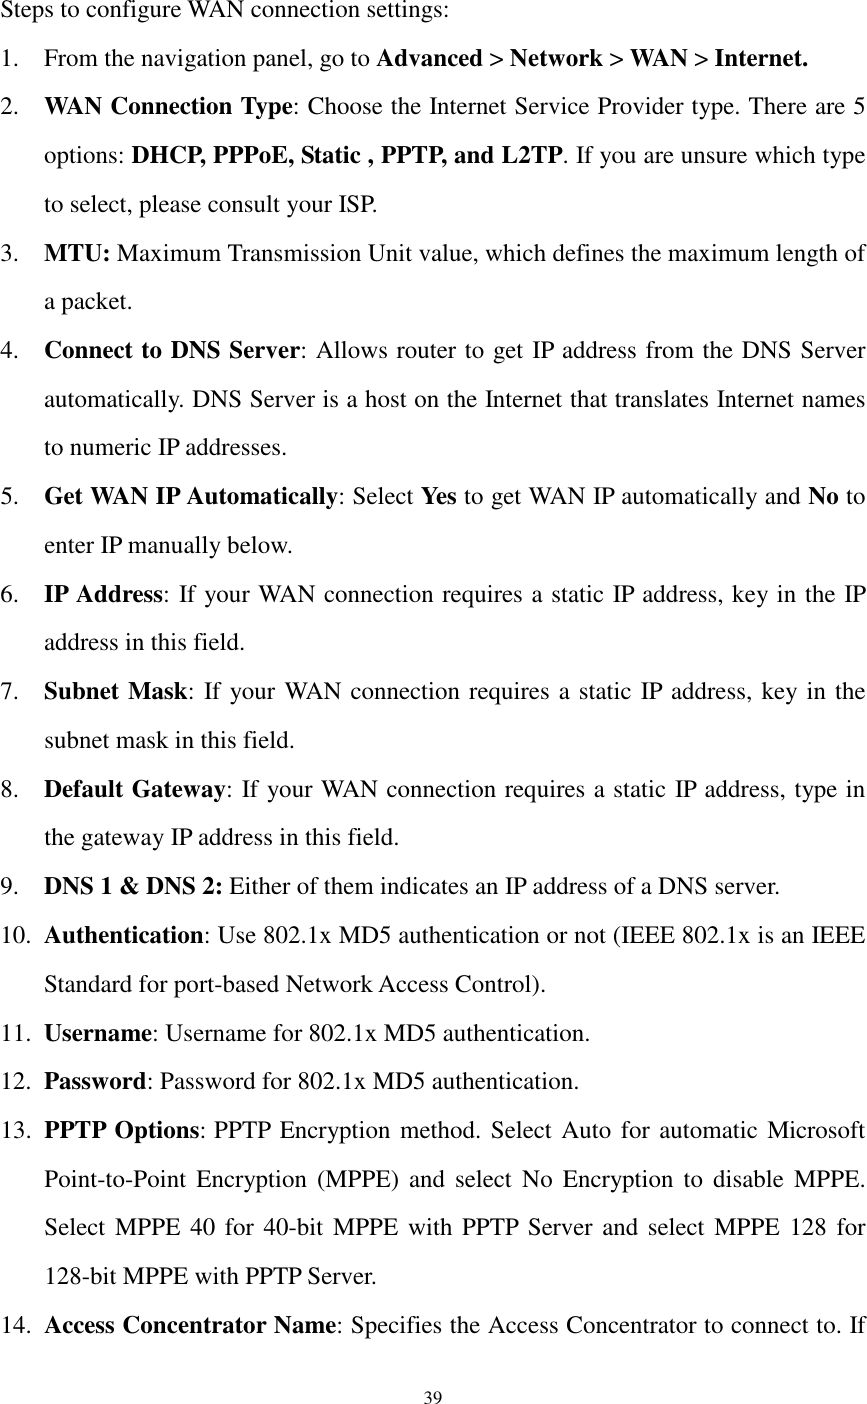  39     Steps to configure WAN connection settings: 1. From the navigation panel, go to Advanced &gt; Network &gt; WAN &gt; Internet. 2. WAN Connection Type: Choose the Internet Service Provider type. There are 5 options: DHCP, PPPoE, Static , PPTP, and L2TP. If you are unsure which type to select, please consult your ISP.   3. MTU: Maximum Transmission Unit value, which defines the maximum length of a packet. 4. Connect to DNS Server: Allows router to get IP address from the DNS Server automatically. DNS Server is a host on the Internet that translates Internet names to numeric IP addresses. 5. Get WAN IP Automatically: Select Yes to get WAN IP automatically and No to enter IP manually below. 6. IP Address: If your WAN connection requires a static IP address, key in the IP address in this field. 7. Subnet Mask: If your WAN connection requires a static IP address, key in the subnet mask in this field. 8. Default Gateway: If your WAN connection requires a static IP address, type in the gateway IP address in this field. 9. DNS 1 &amp; DNS 2: Either of them indicates an IP address of a DNS server.   10. Authentication: Use 802.1x MD5 authentication or not (IEEE 802.1x is an IEEE Standard for port-based Network Access Control). 11. Username: Username for 802.1x MD5 authentication. 12. Password: Password for 802.1x MD5 authentication. 13. PPTP Options: PPTP Encryption method. Select Auto for automatic Microsoft Point-to-Point  Encryption  (MPPE)  and  select  No  Encryption to  disable  MPPE. Select MPPE 40 for 40-bit  MPPE with PPTP Server and select MPPE 128 for 128-bit MPPE with PPTP Server. 14. Access Concentrator Name: Specifies the Access Concentrator to connect to. If 